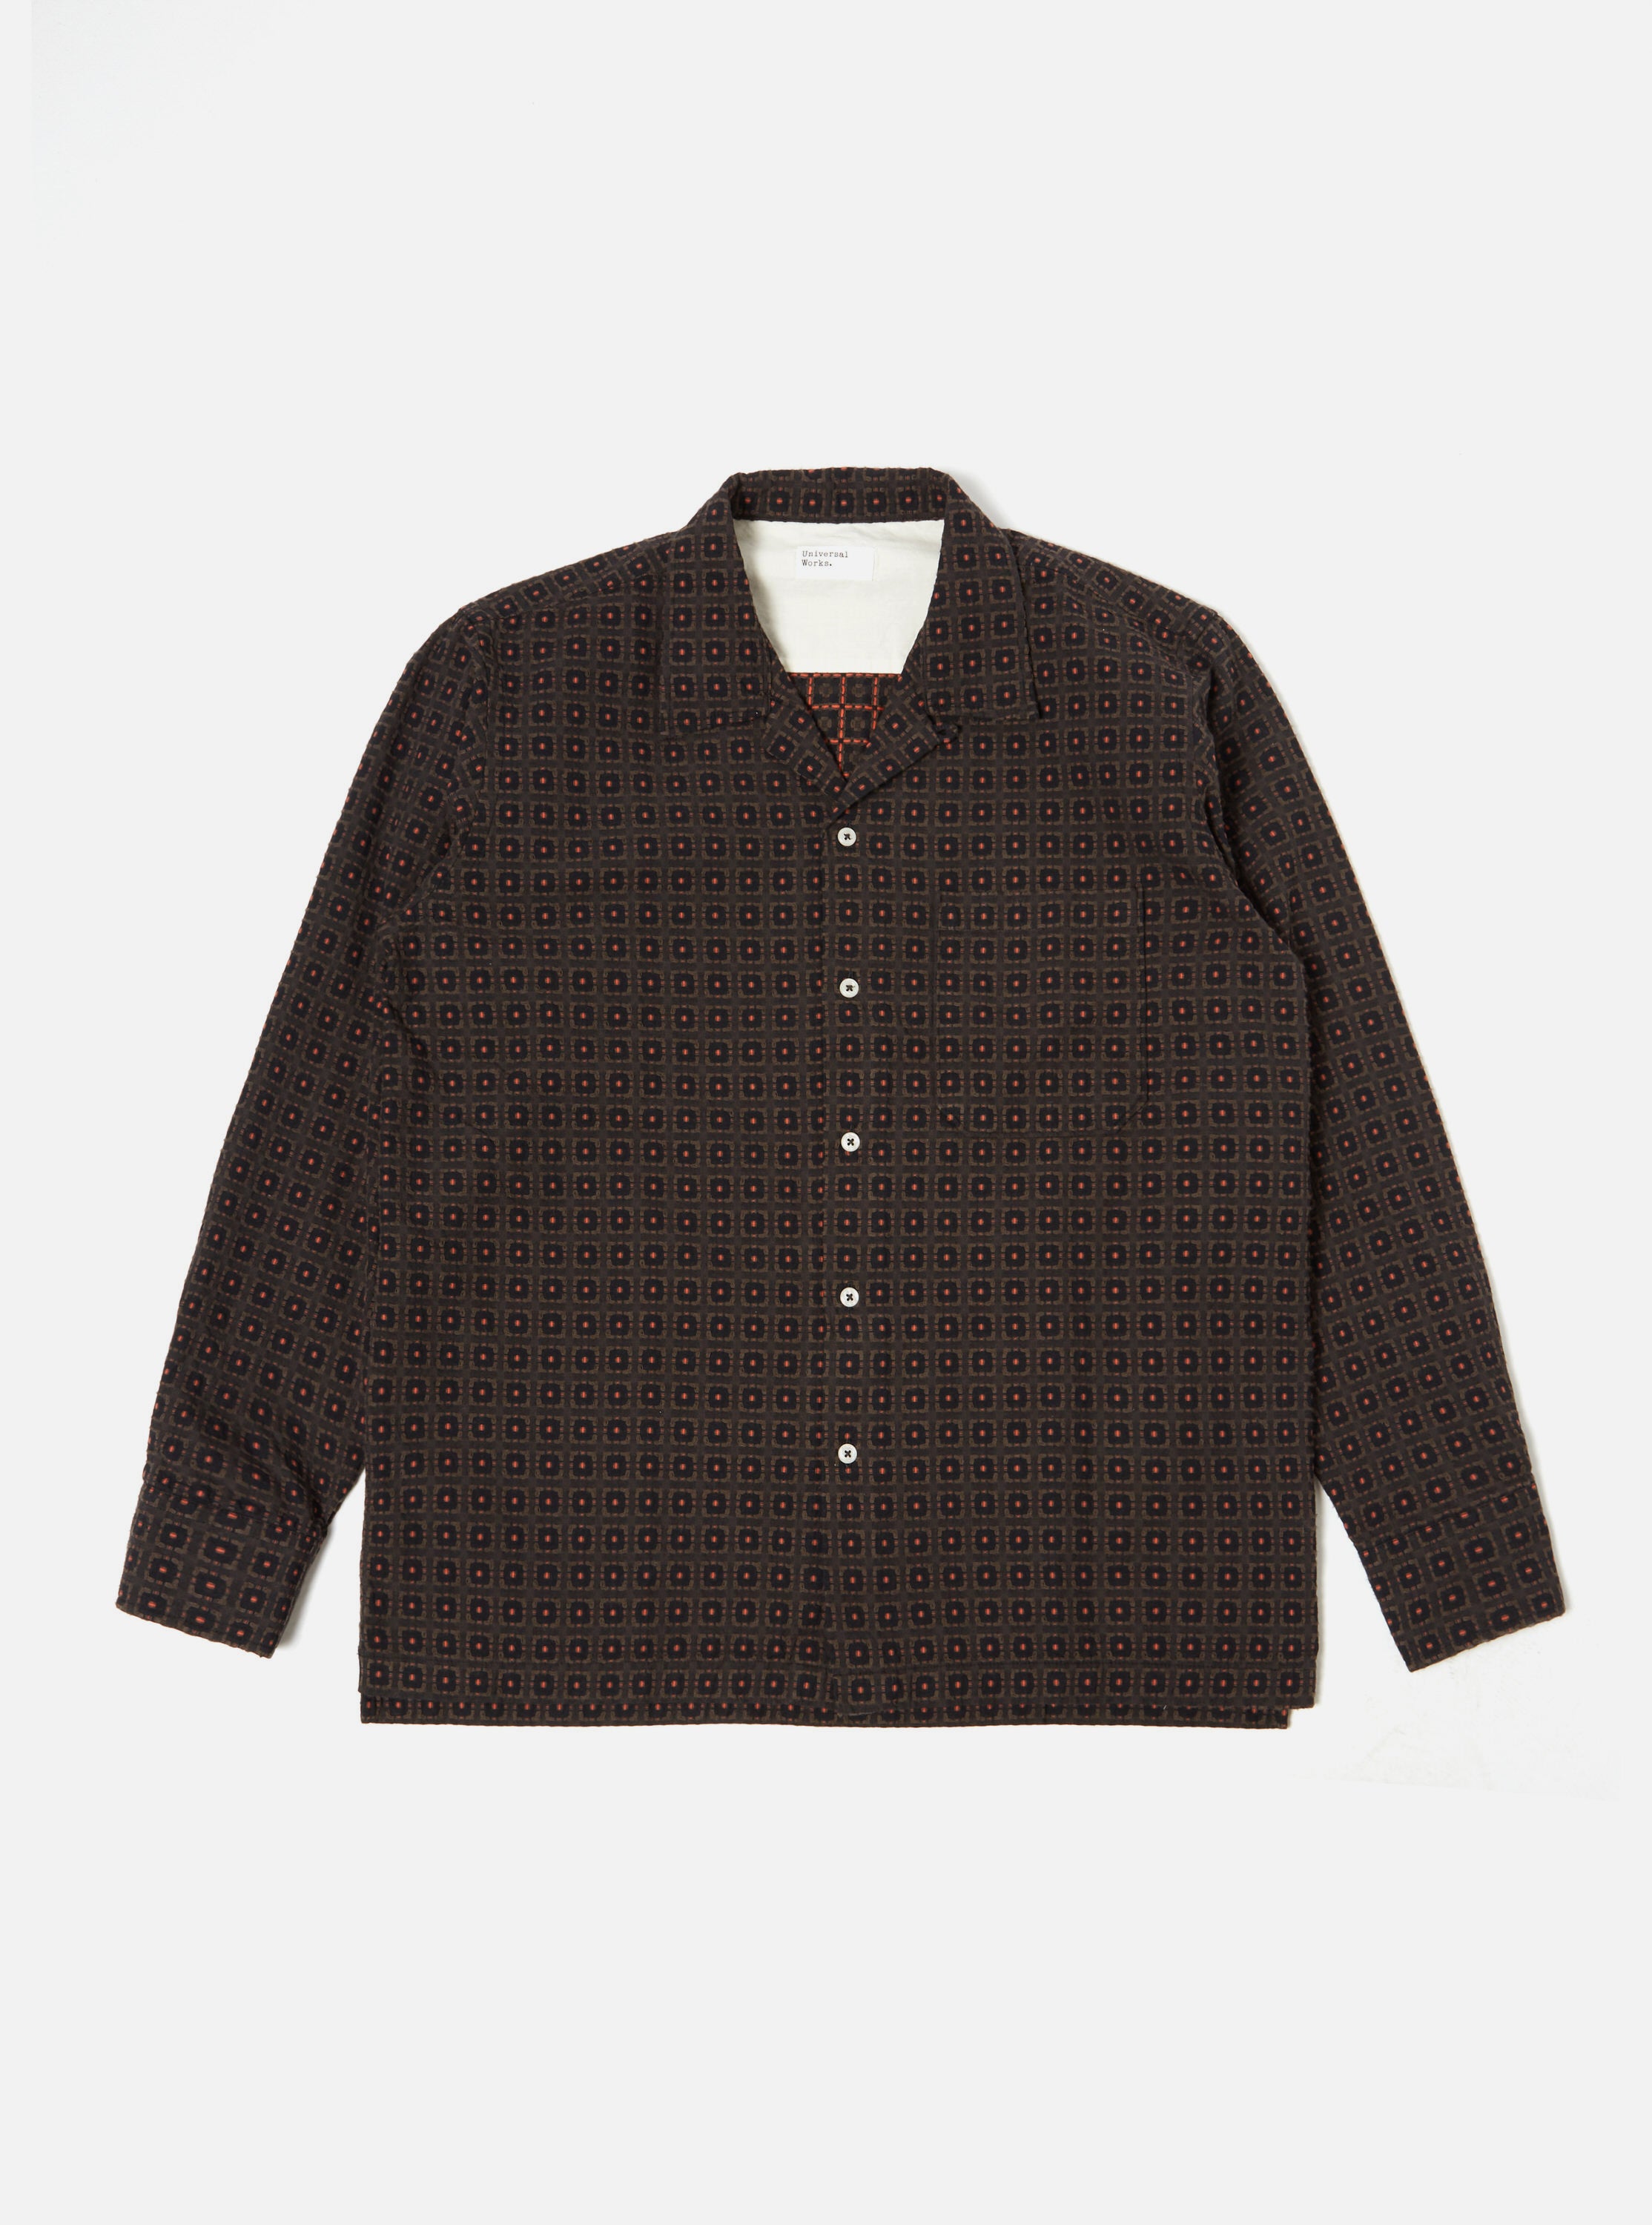 Universal Works L/S Camp Shirt in Brown Delos 8 Cotton